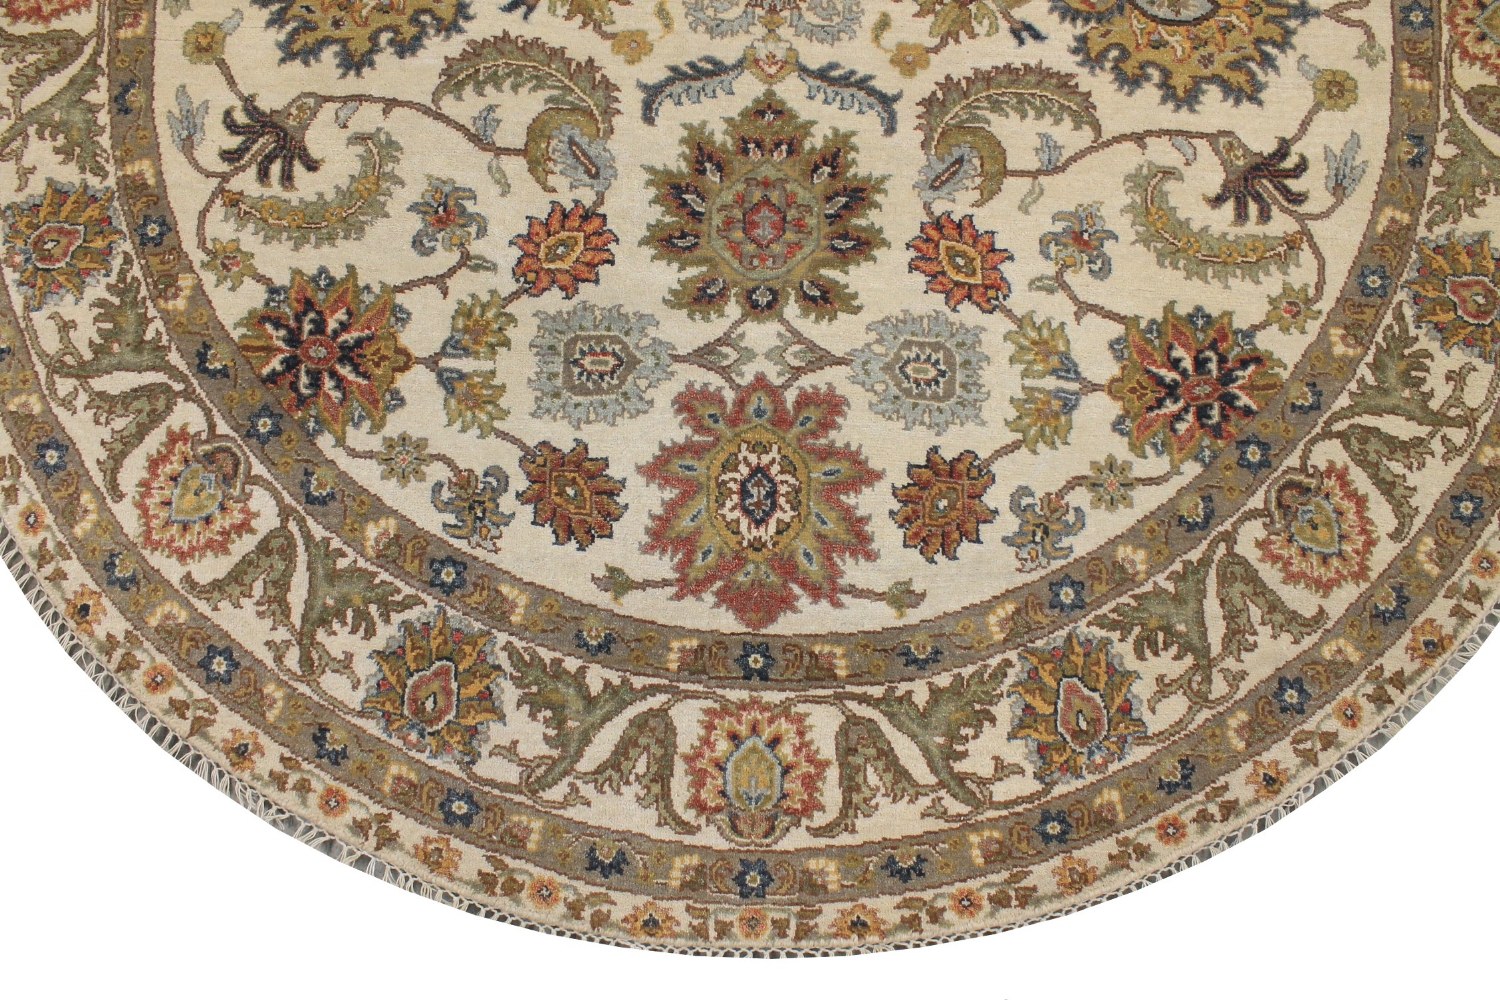 6 ft. - 7 ft. Round & Square Traditional Hand Knotted Wool Area Rug - MR028718